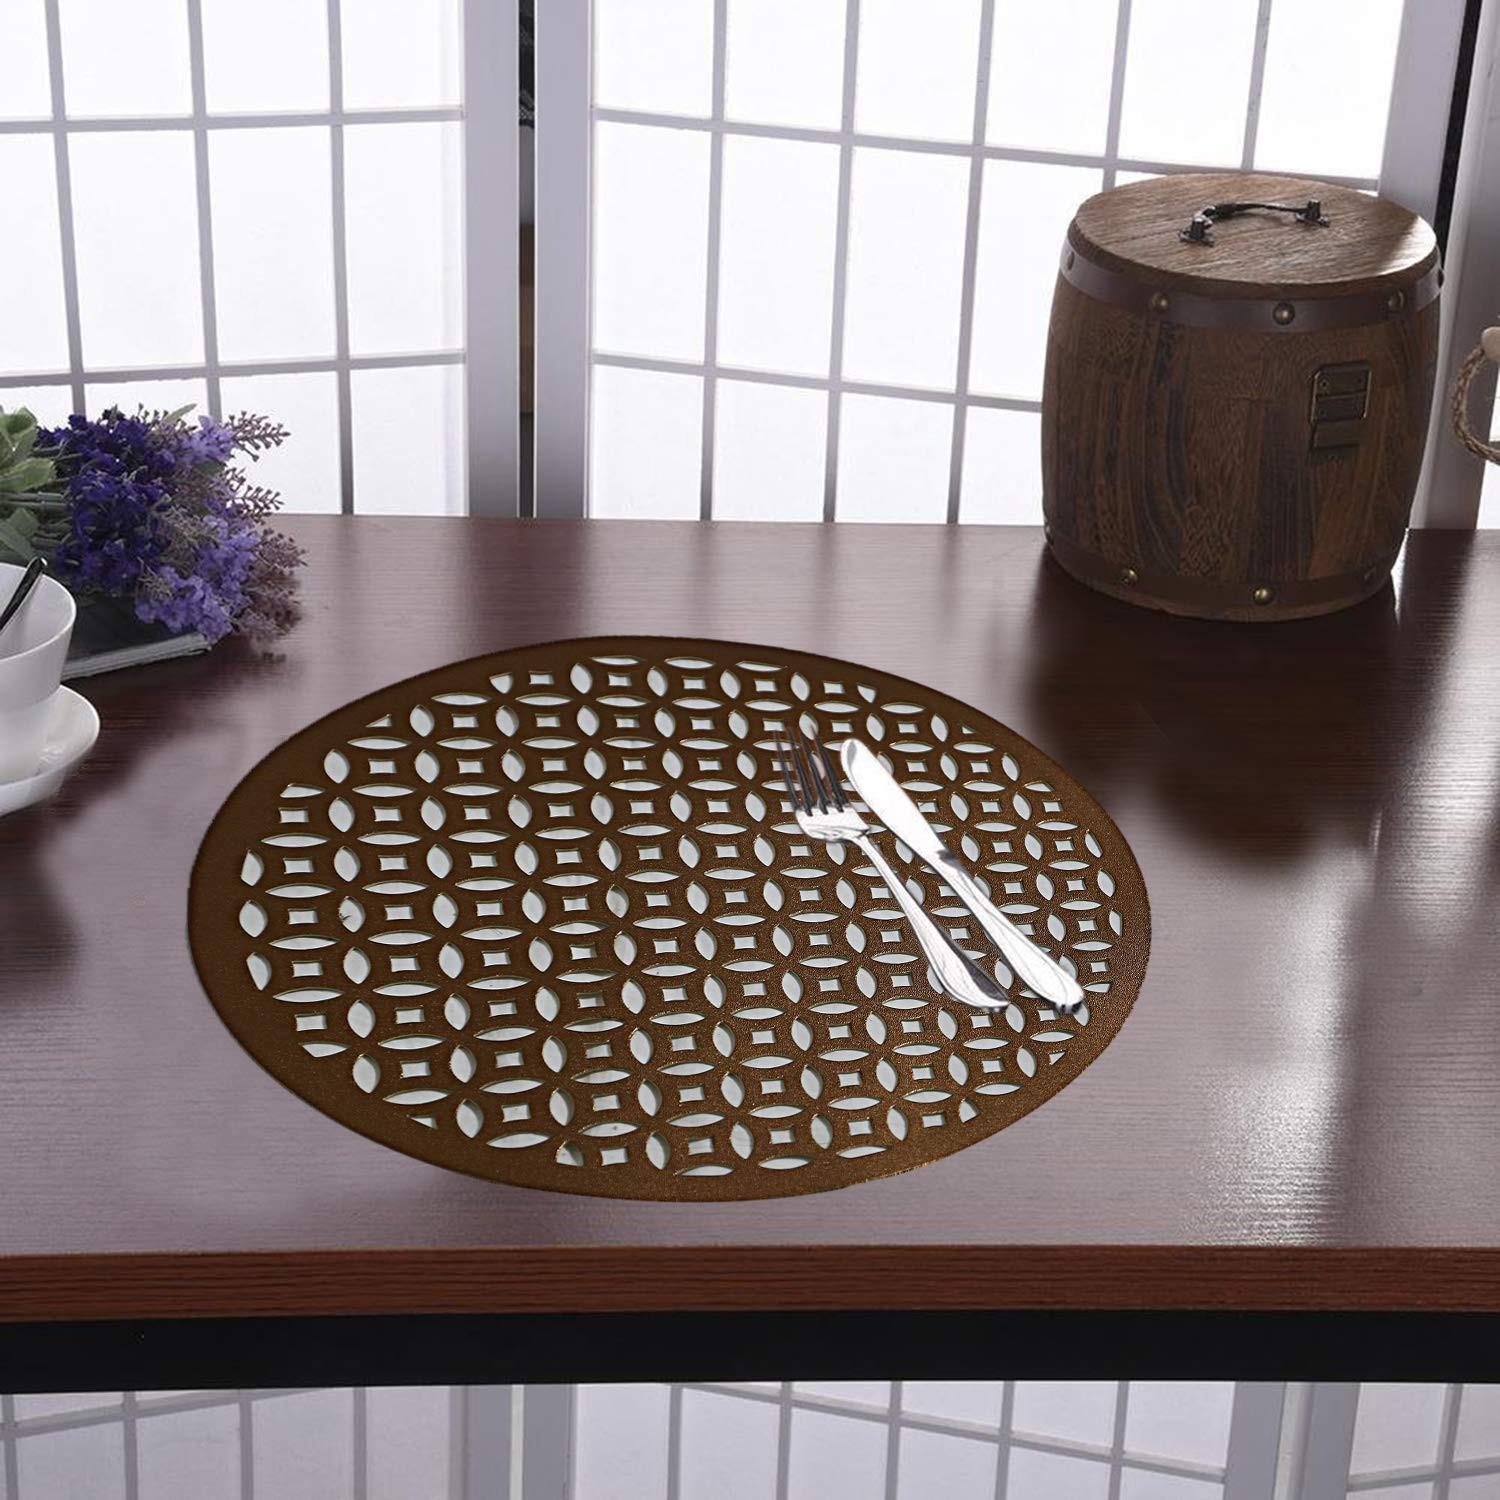 Kuber Industries Rounded Soft Leather Table Placemats, Set of 4 (Copper)